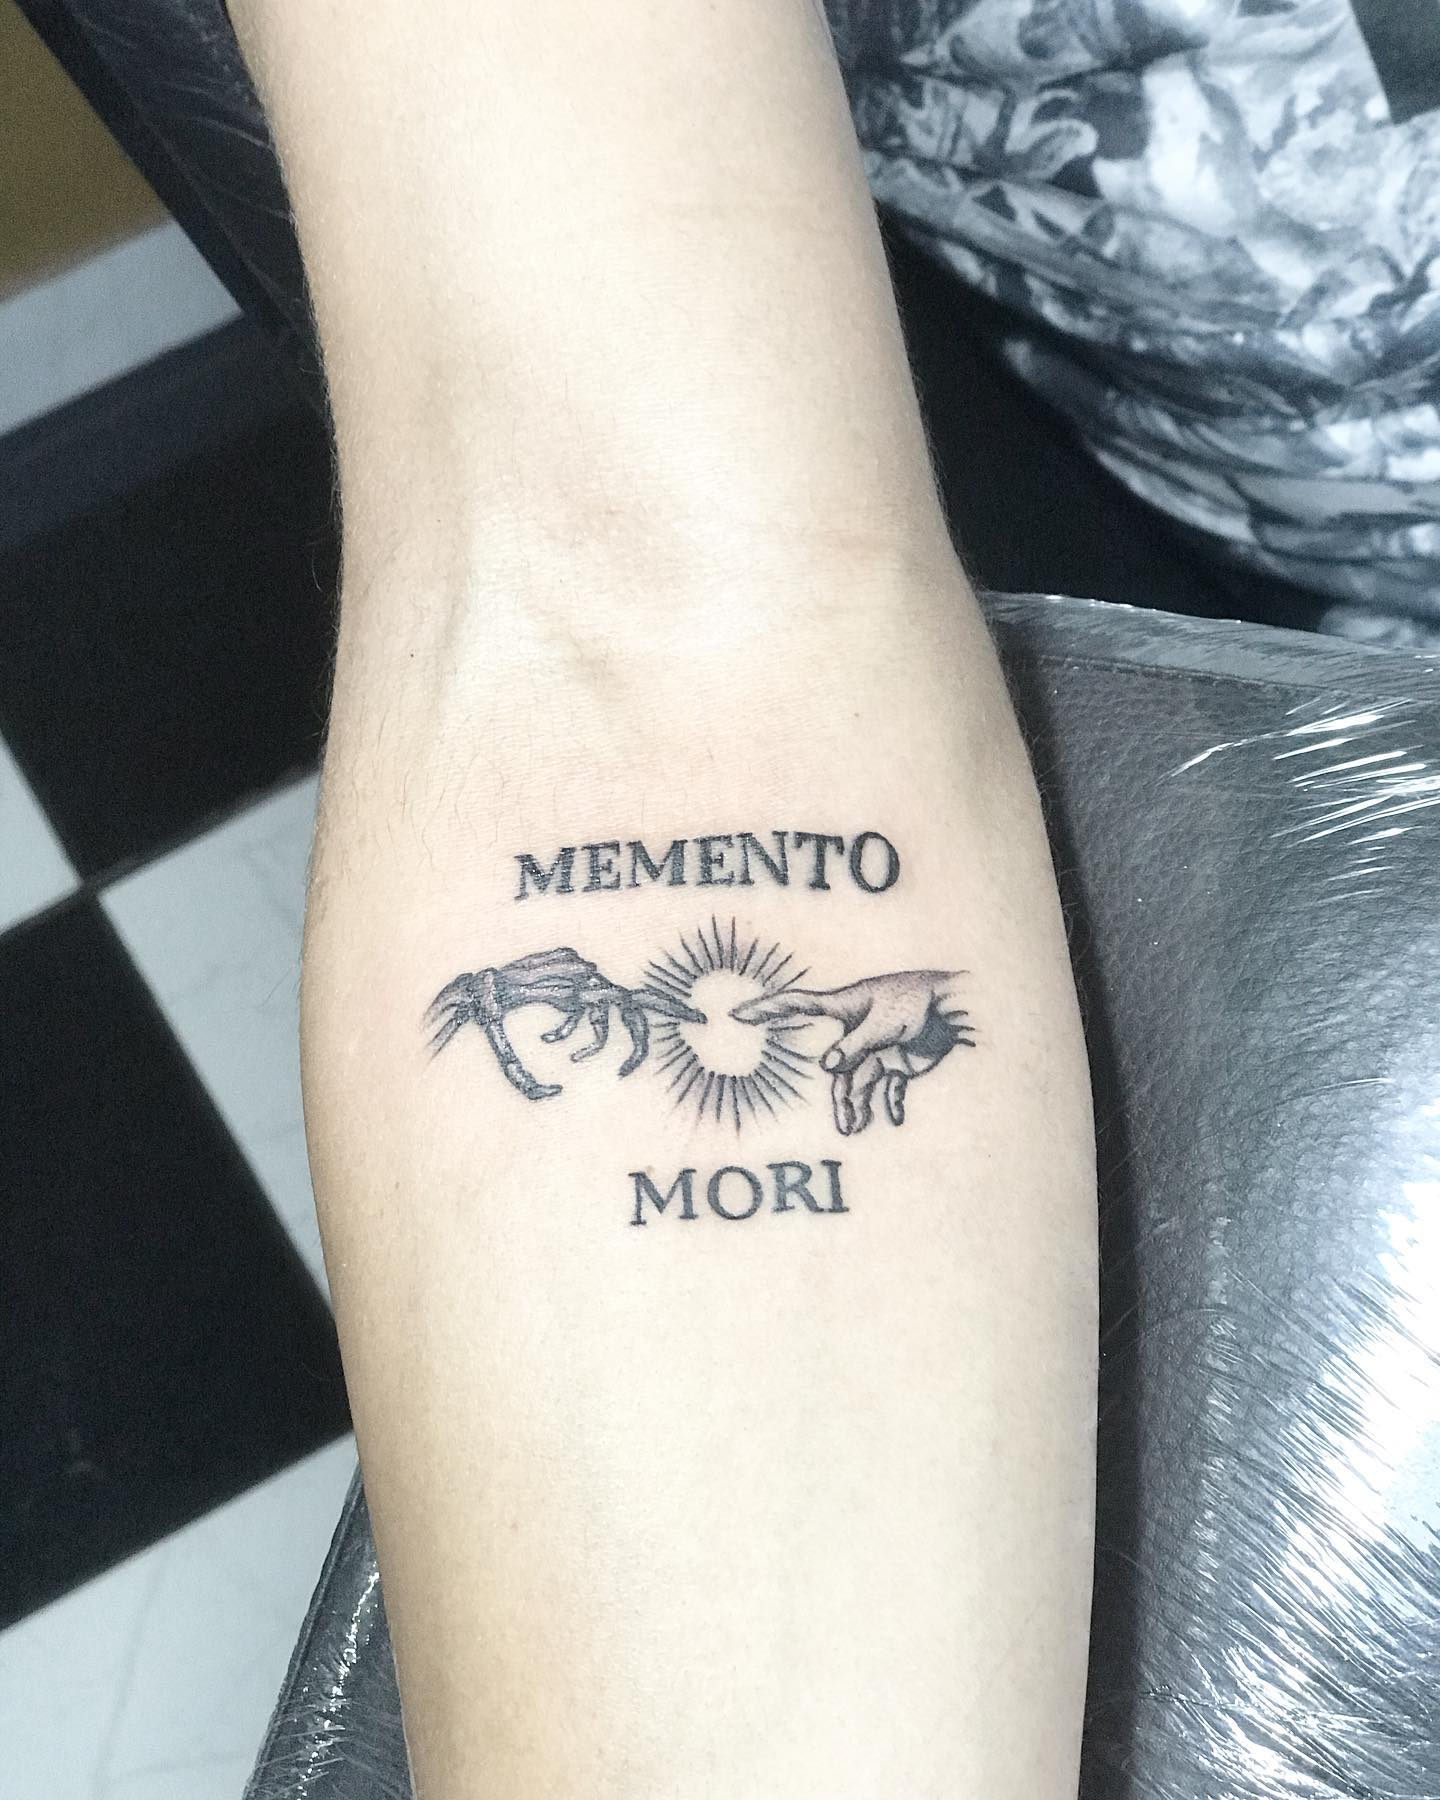 Memento mori  A new dotworkgeometric tattoo design inspired by the  inevitability of death Hope youll like it   rTattooDesigns